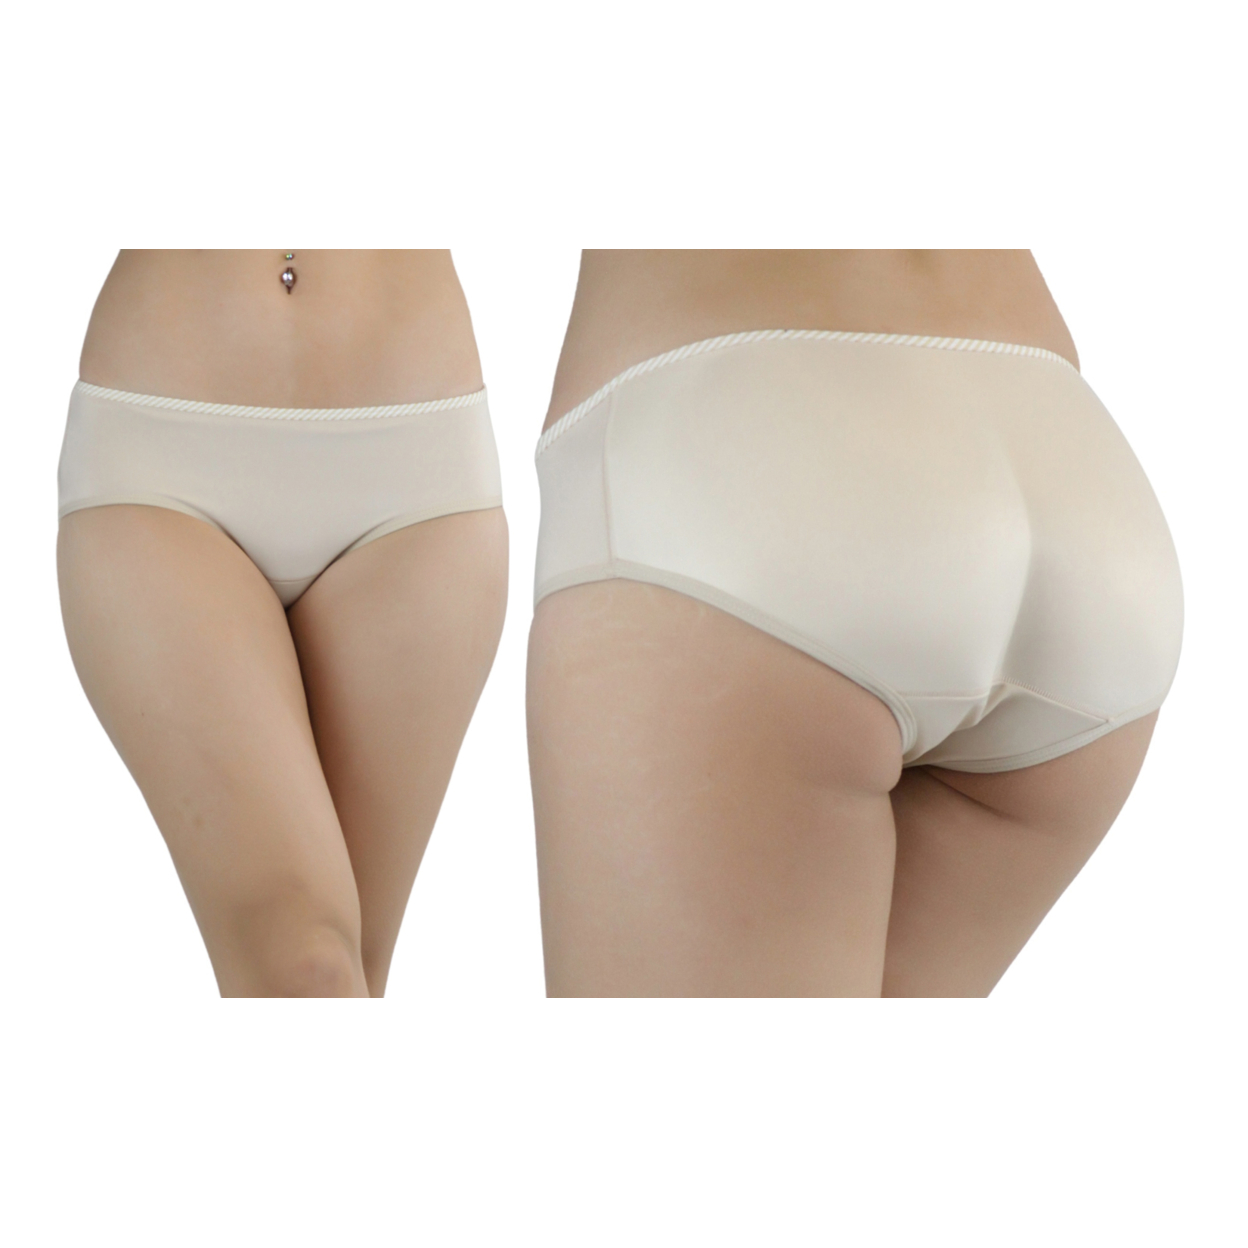 Women's Instant Booty Boosters Padded Panty - Beige, L